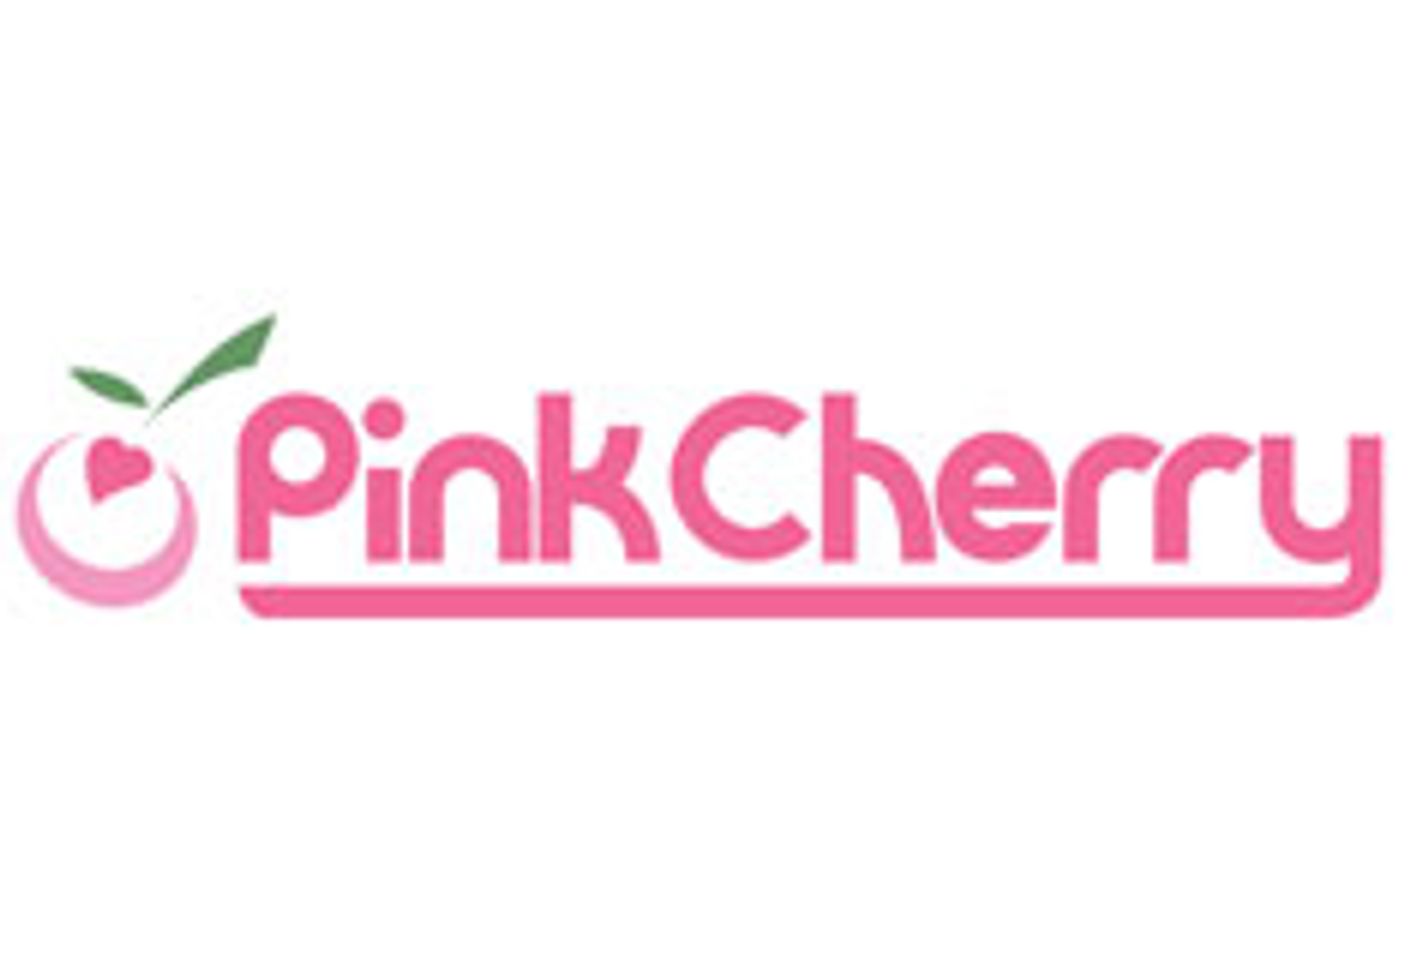 Not Just Another Giveaway: Celebrate with PinkCherry, California Exotics on a New Pink Vespa